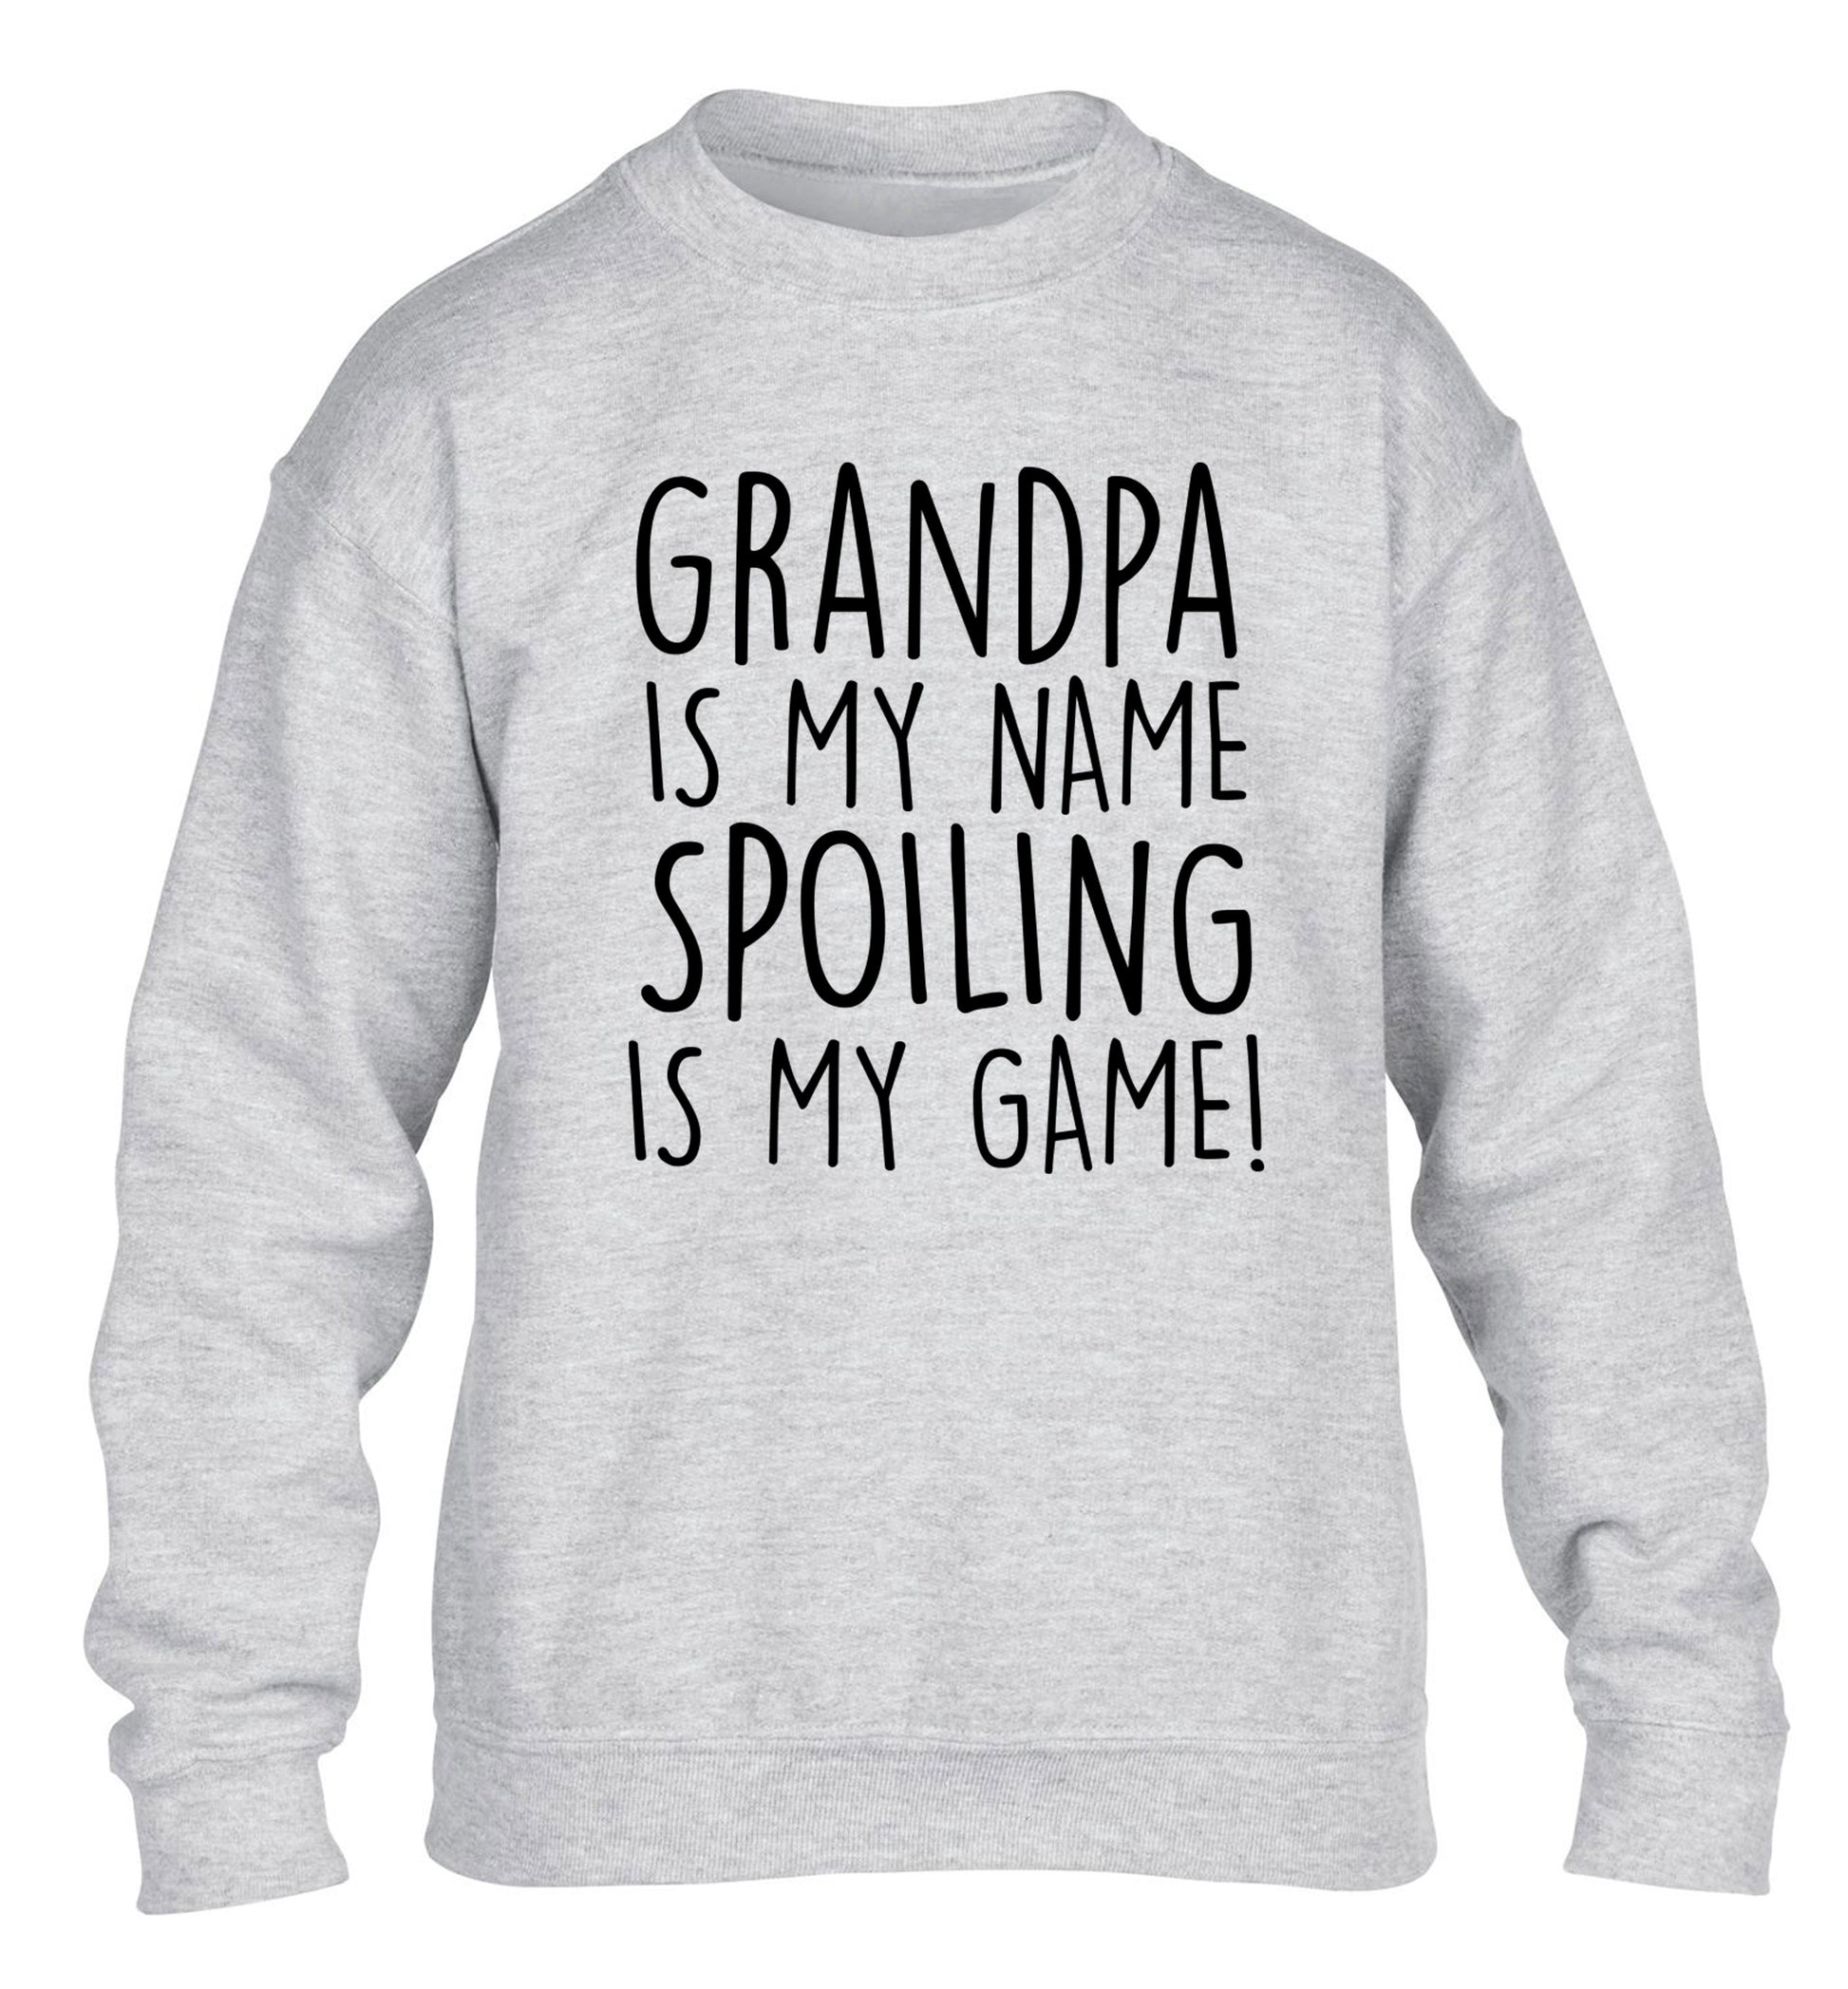 Grandpa is my name, spoiling is my game children's grey sweater 12-14 Years